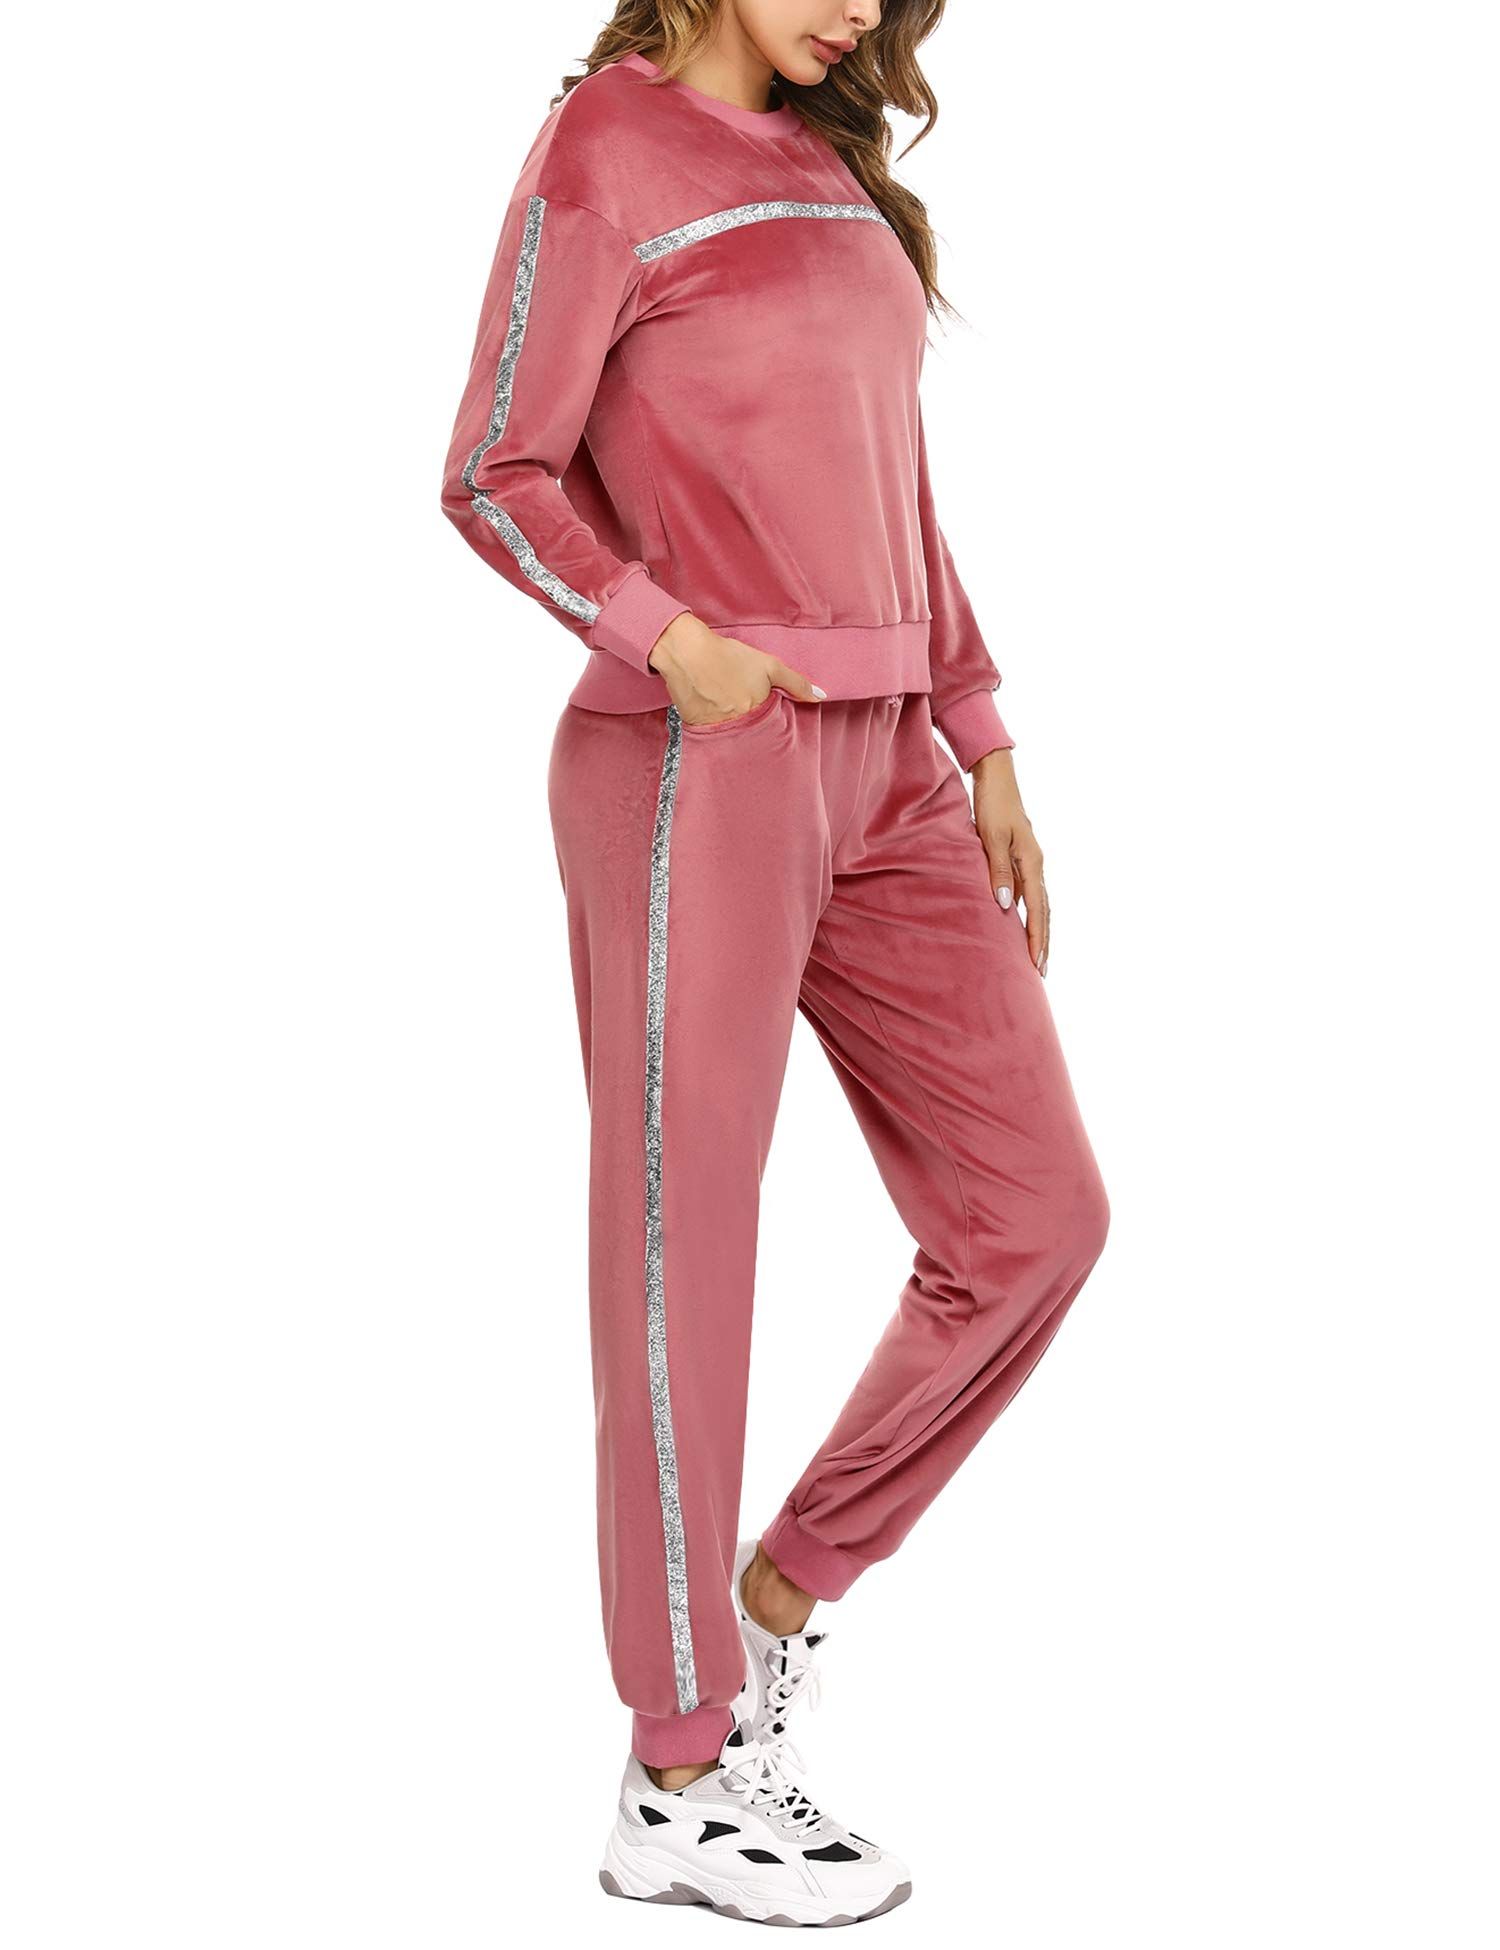 Sykooria Women's Velour Sweatsuits Sets 2 Piece Outfits Tracksuit Long Sleeve Pullover and Sweatp... | Amazon (US)